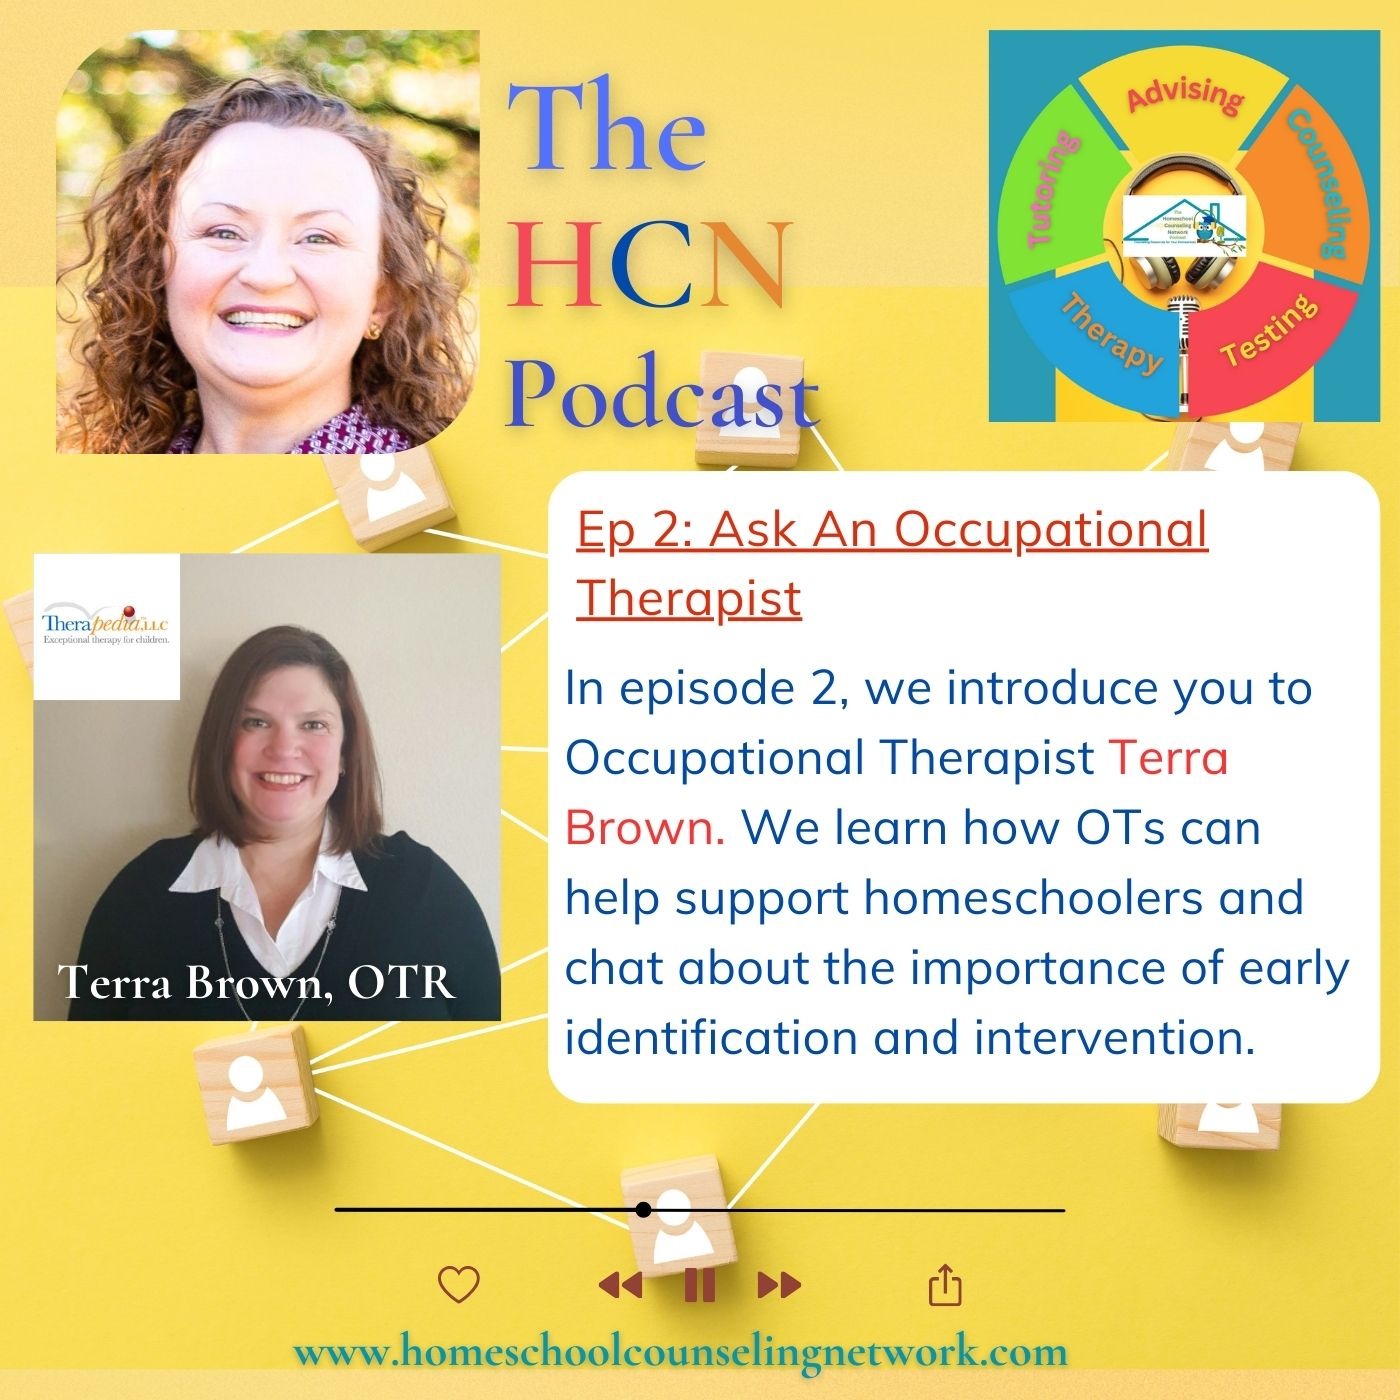 The HCN Podcast – Episode 2: Ask An Occupational Therapist